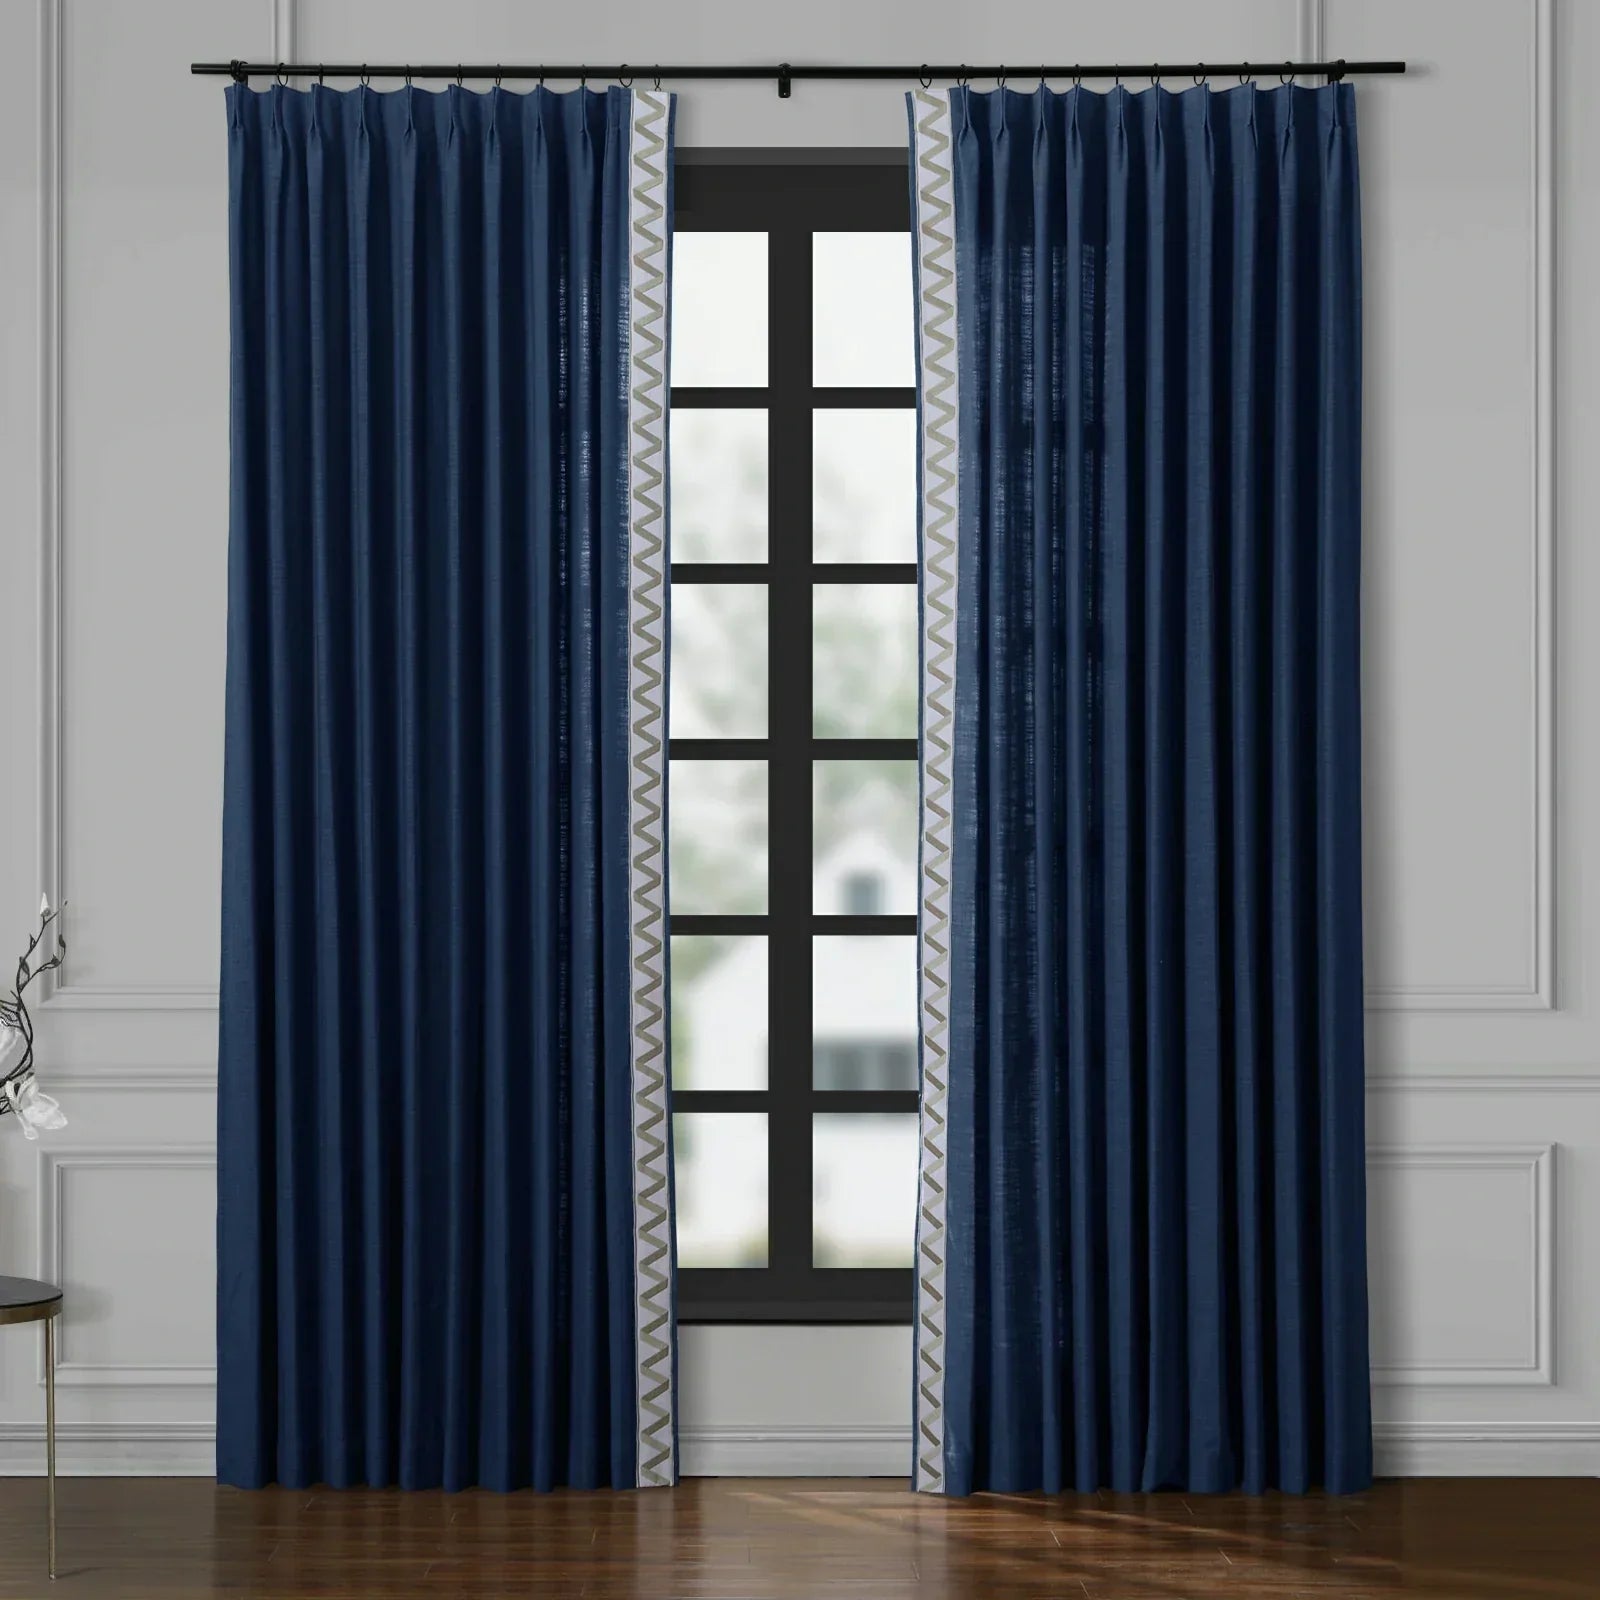 Loomy Modern 38 Colors Polyester Linen Sheer Curtains Living Room/Bedroom 